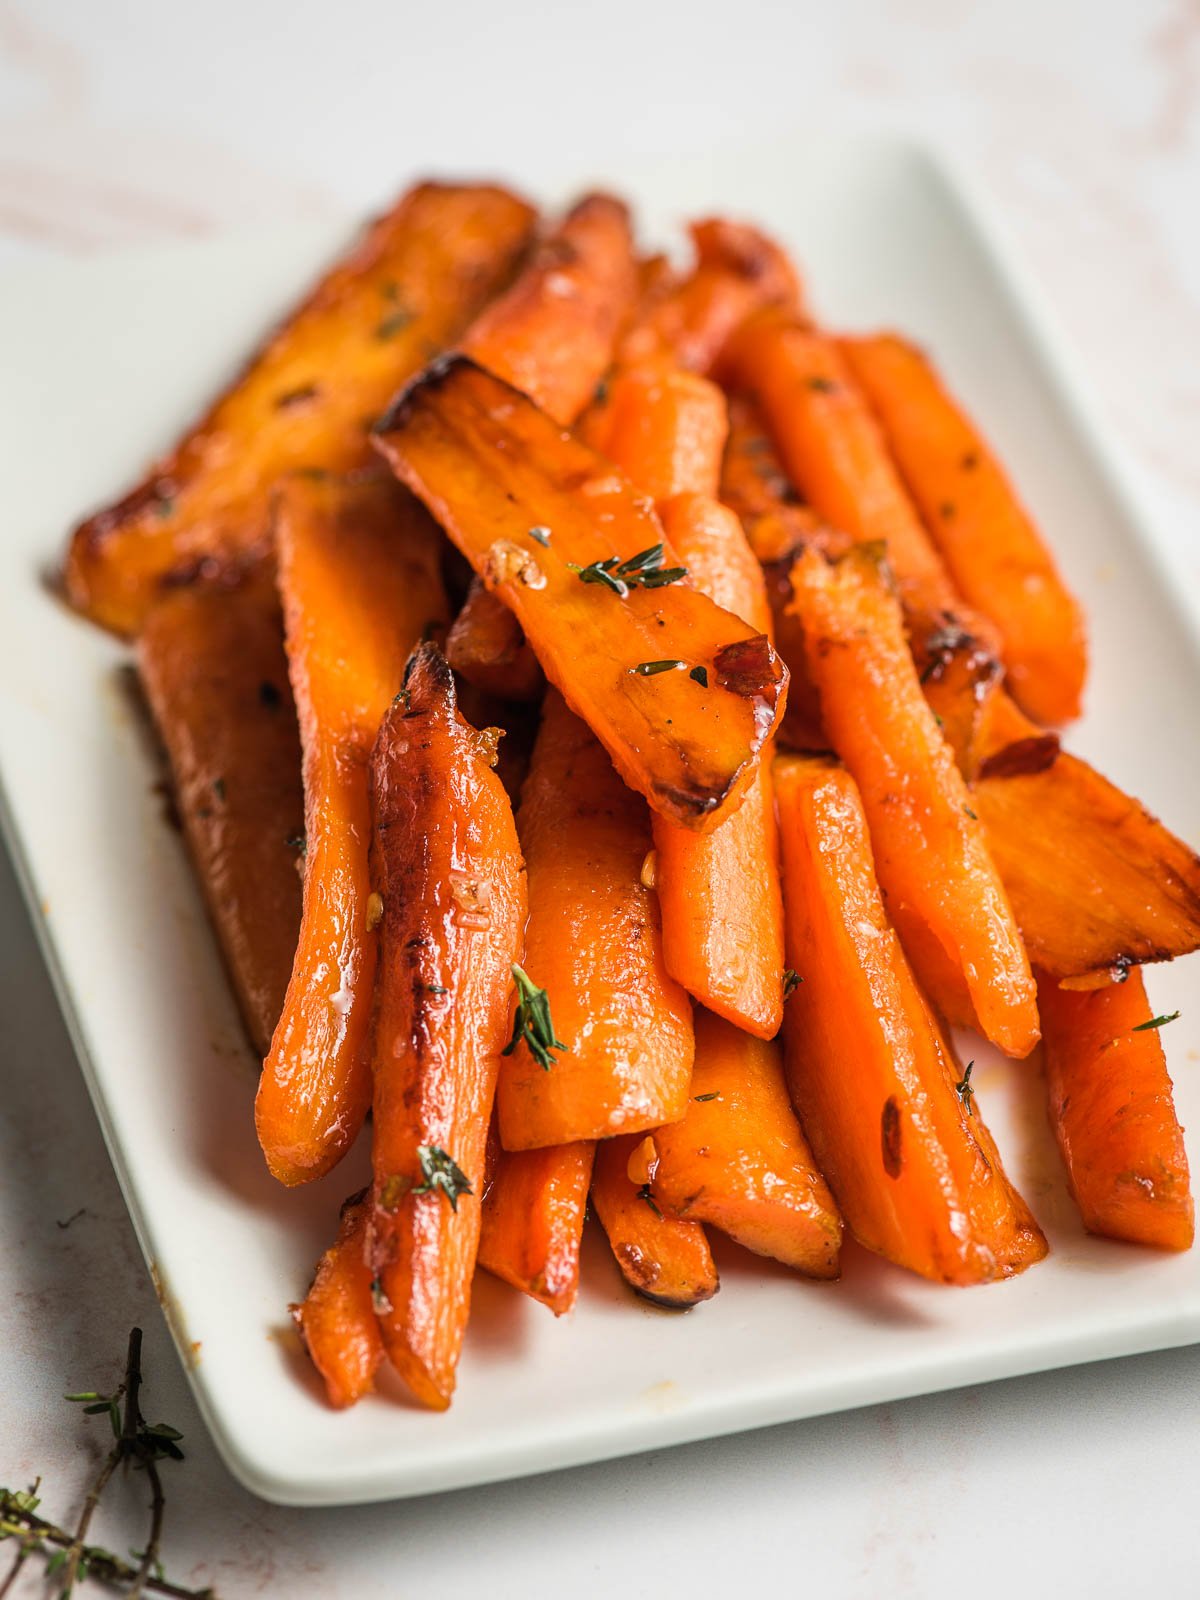 Sauteed Carrots with honey and thyme on a serving platter.